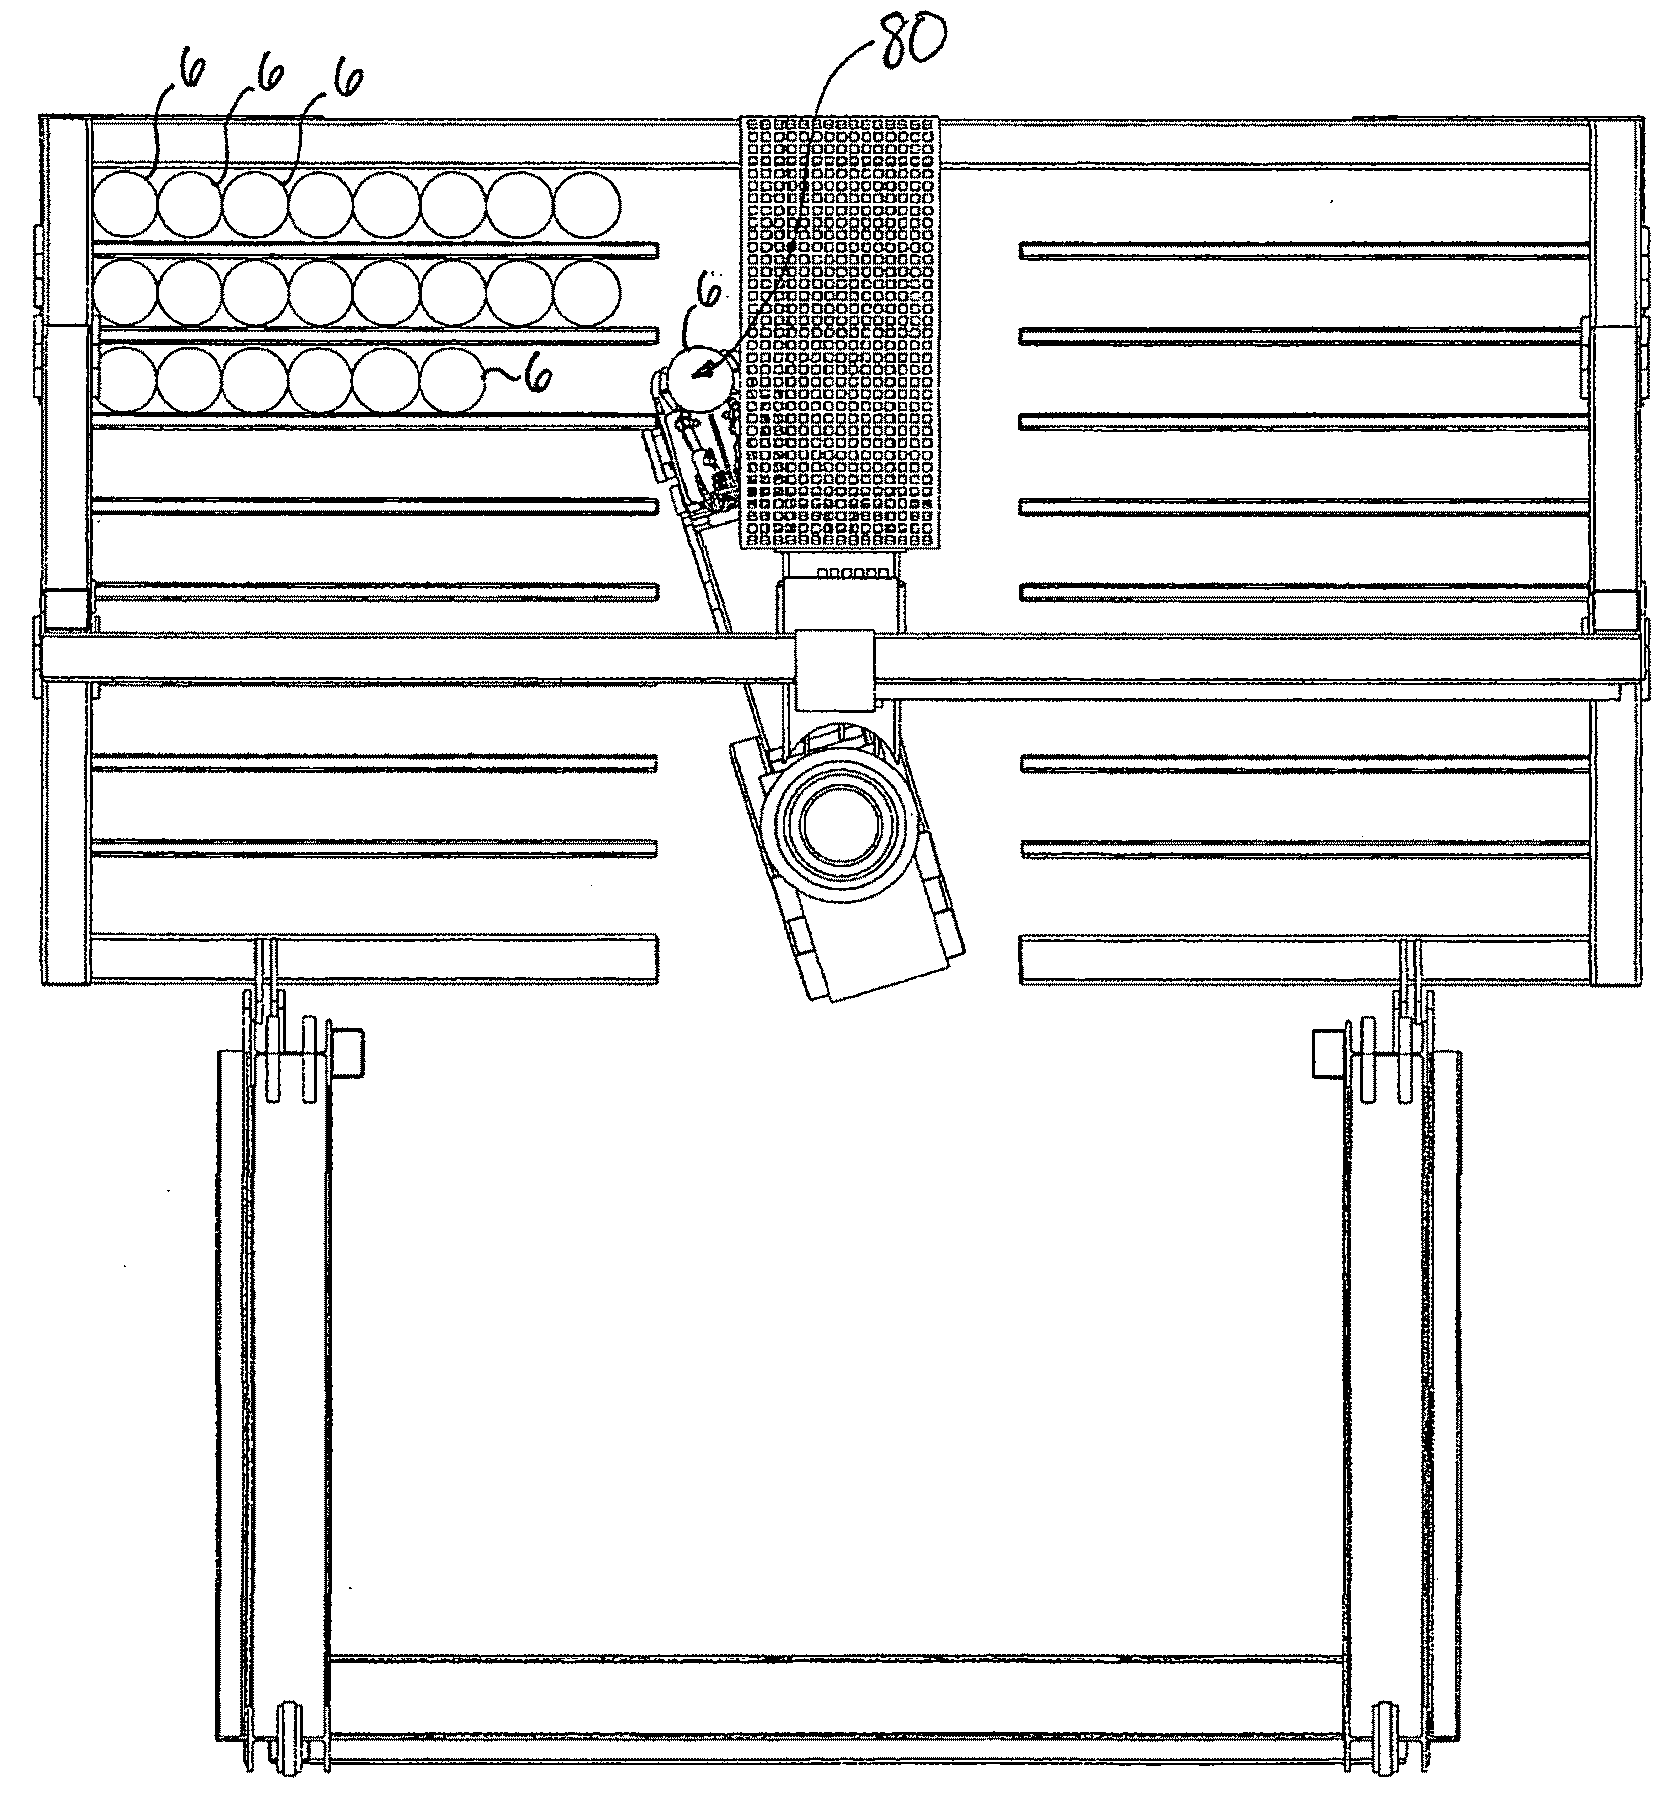 Apparatus for handling and racking pipes